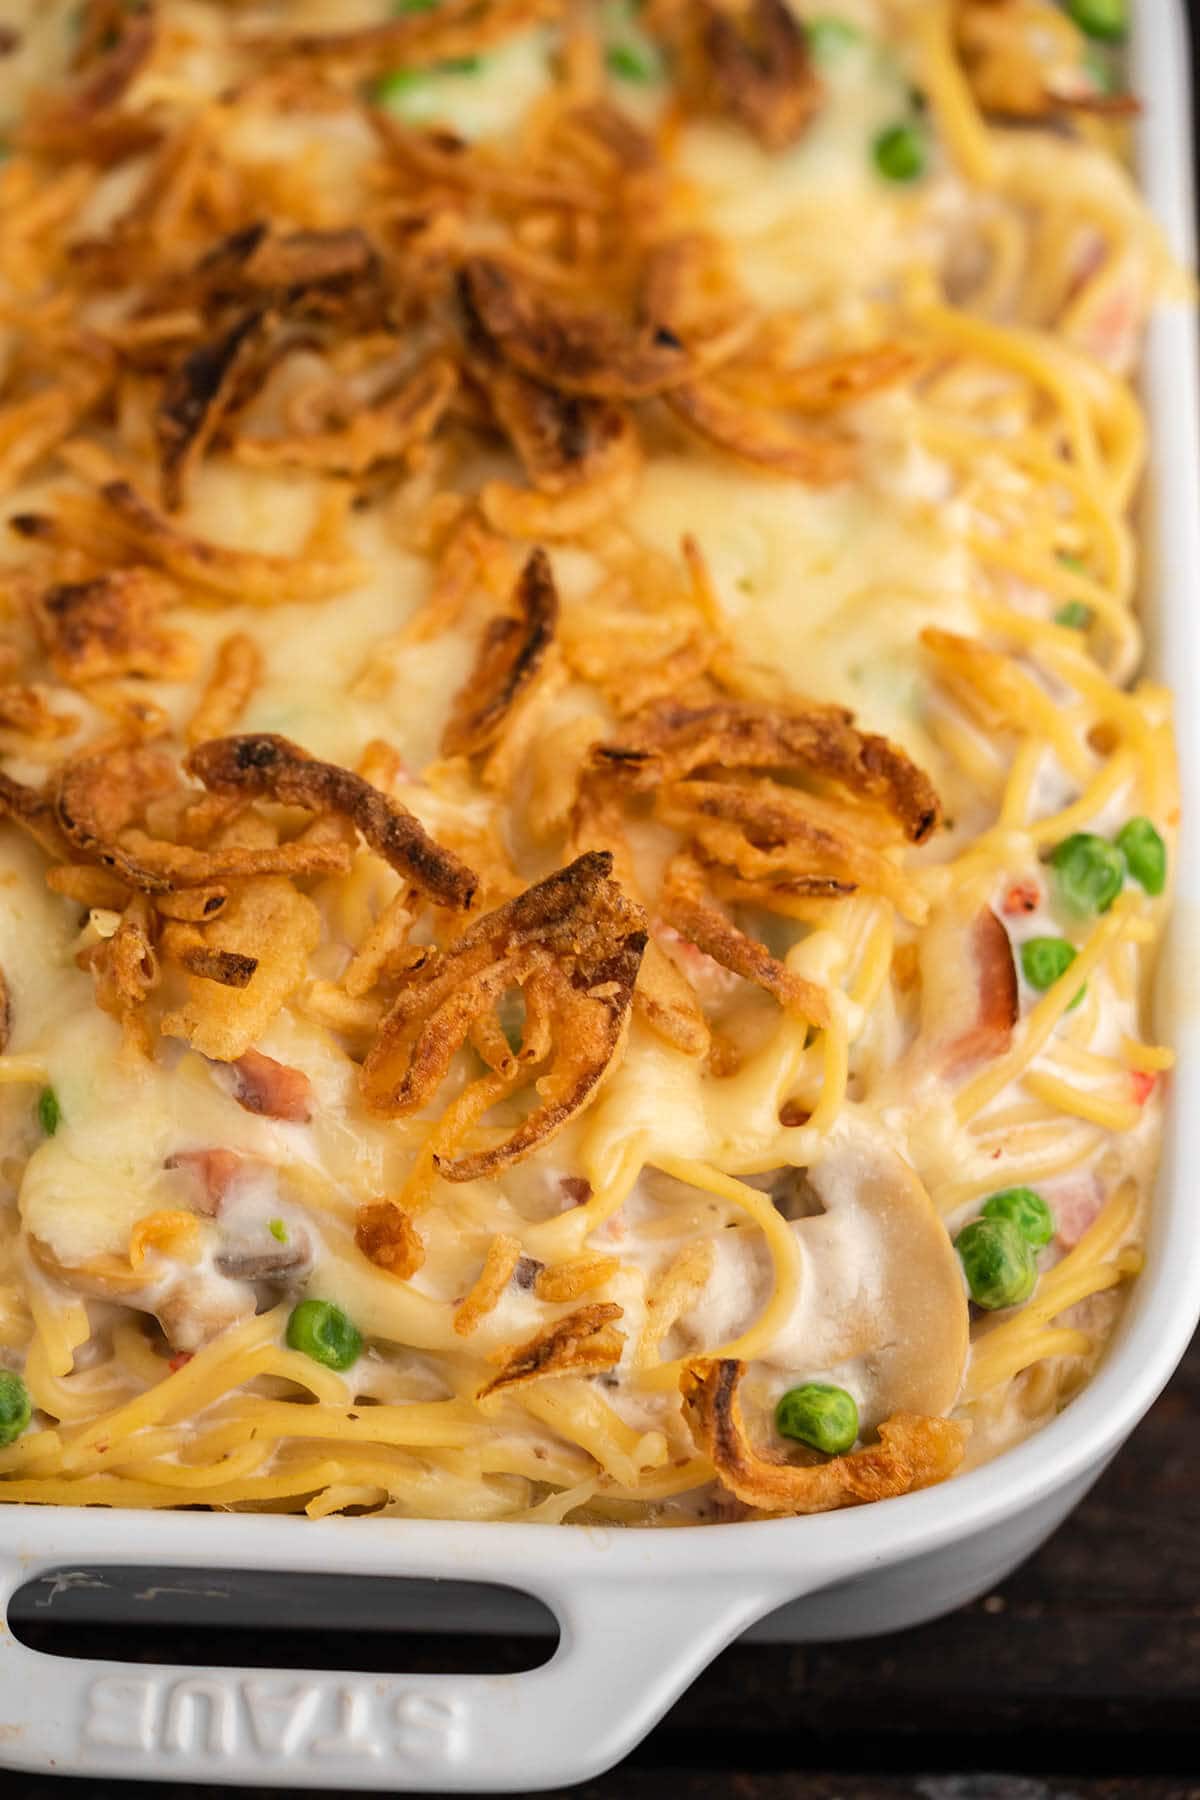 Casserole dish filled with baked ham tetrazzini.